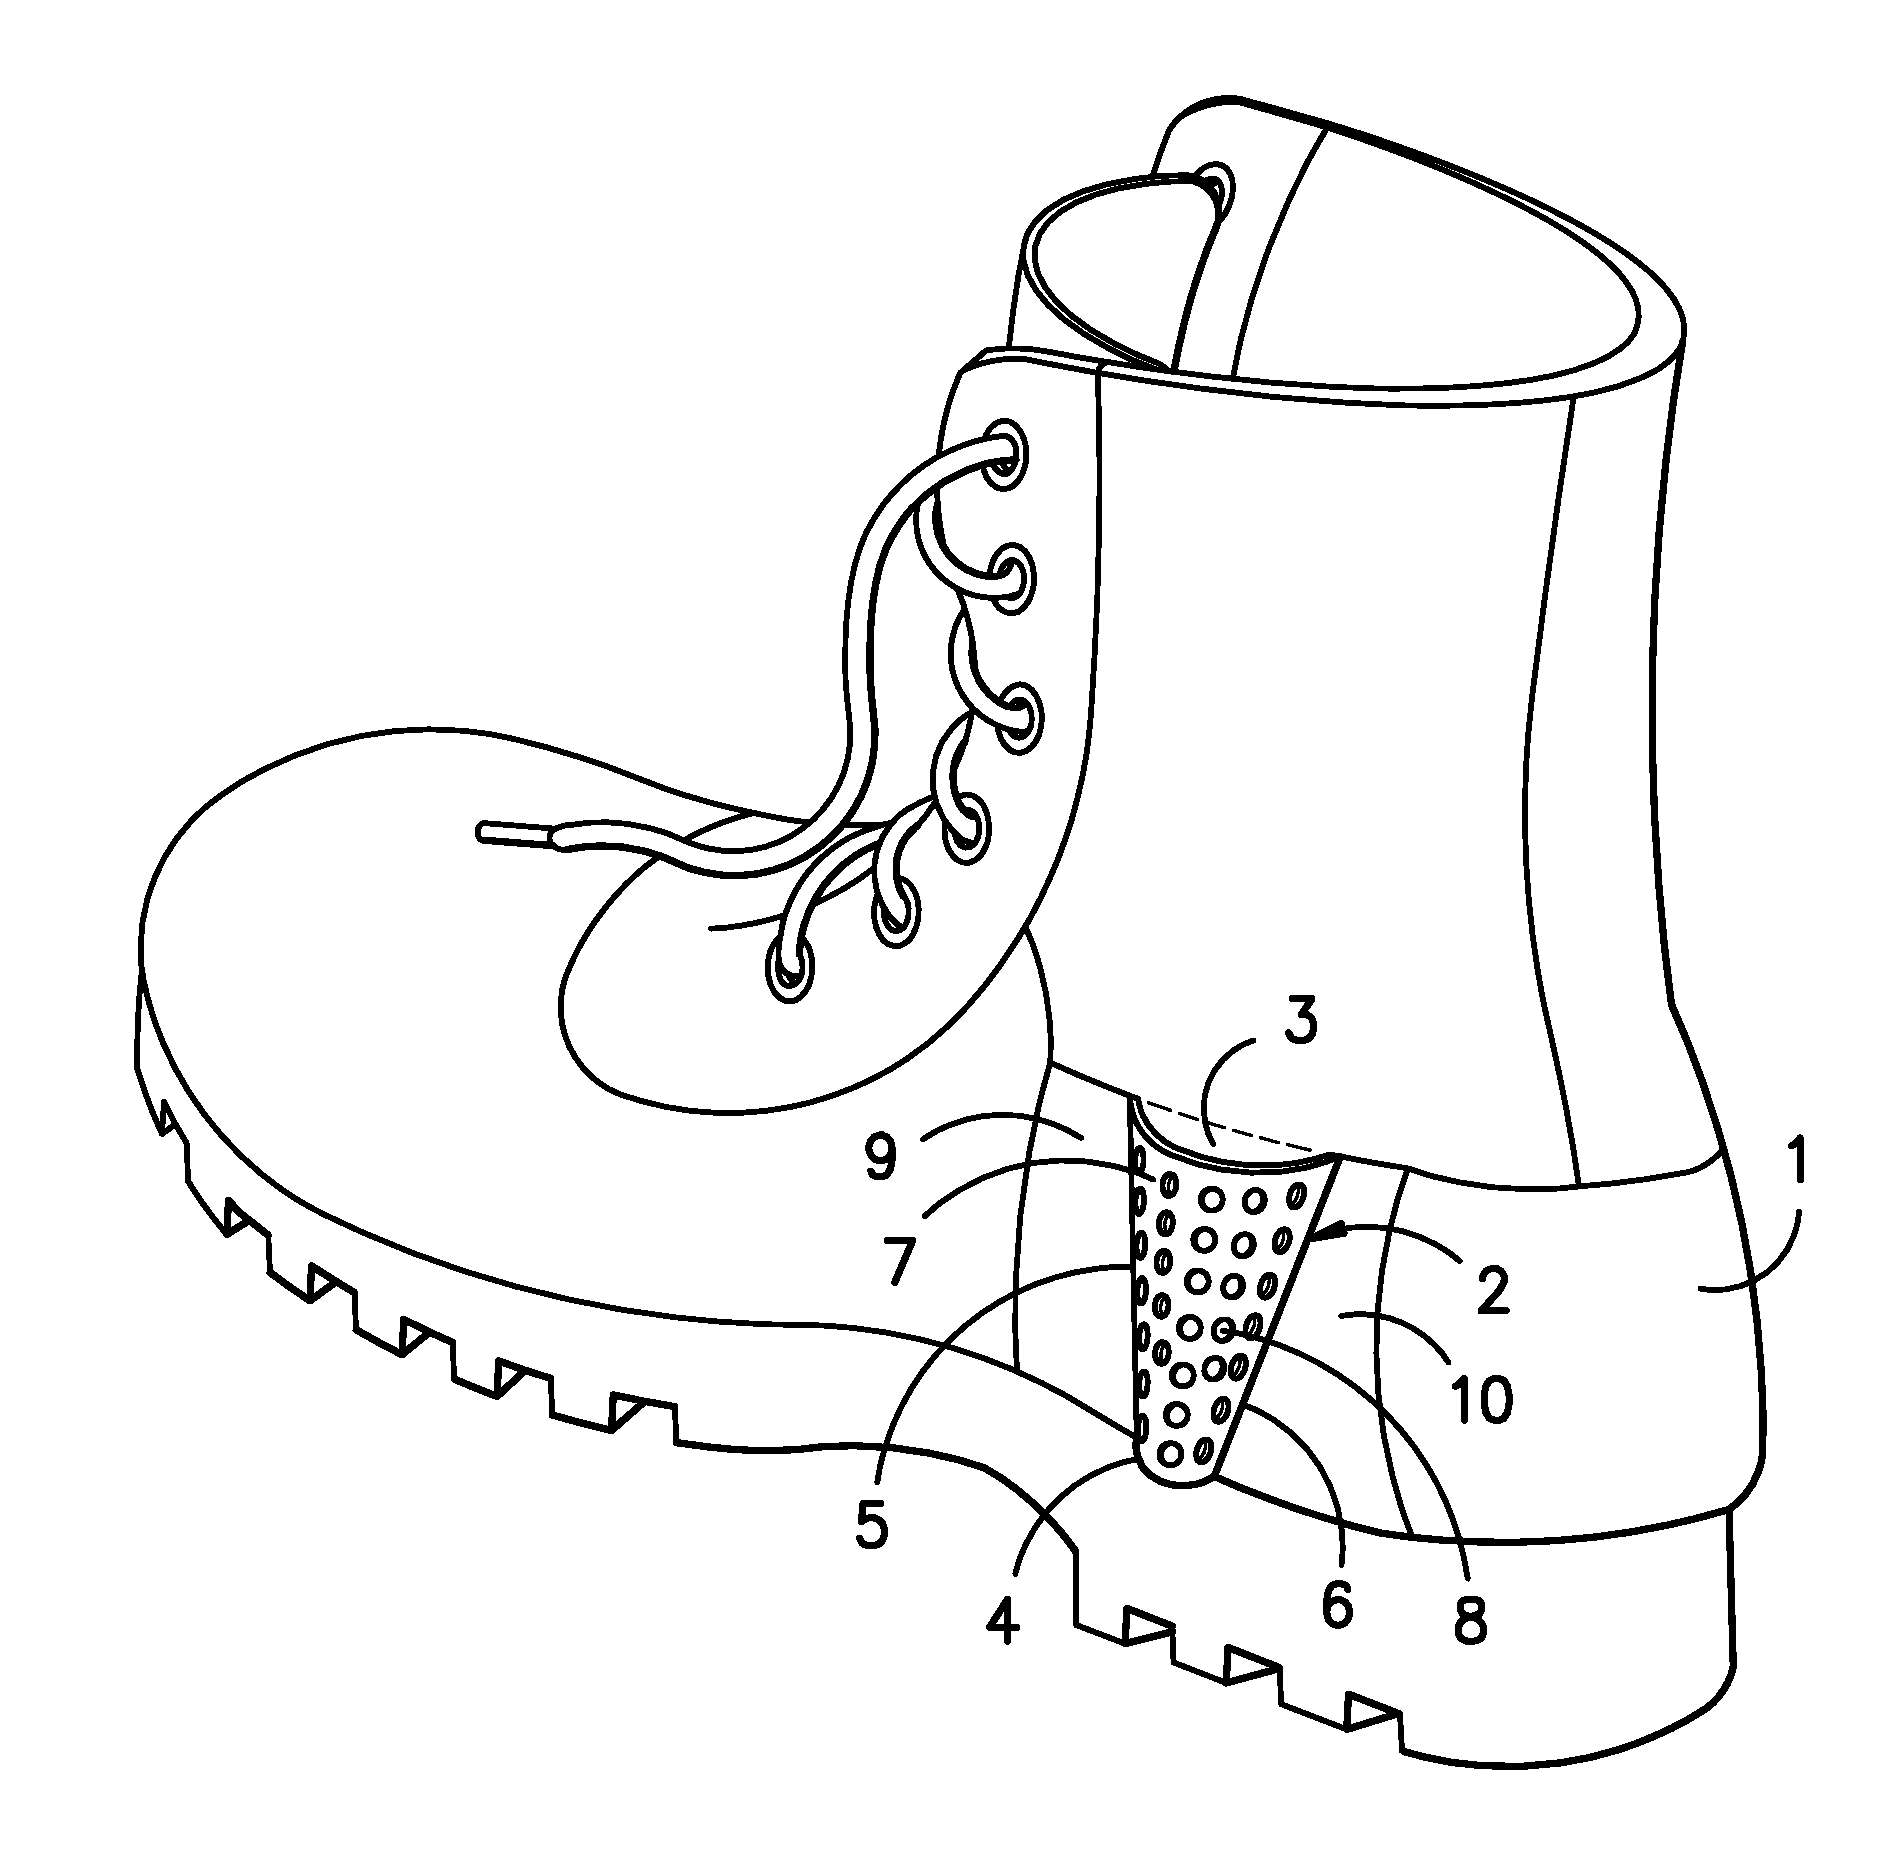 Hunting boot with pocket for scent wick